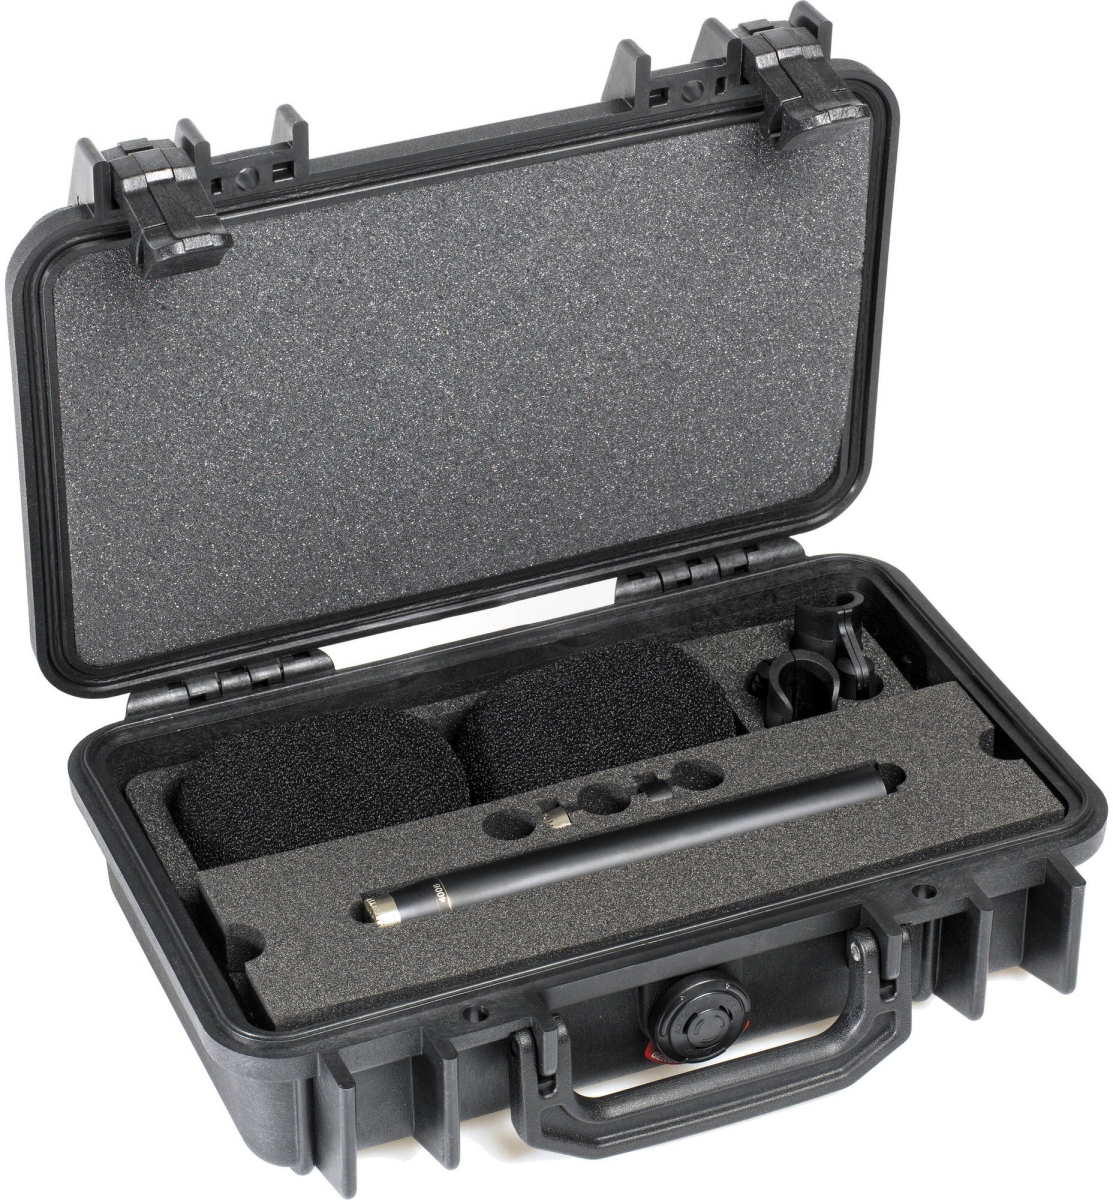 DPA-ST4006A Stereo Omni Mic Pair with Clips & Windscreens in Pelican Case -  DPA Microphones